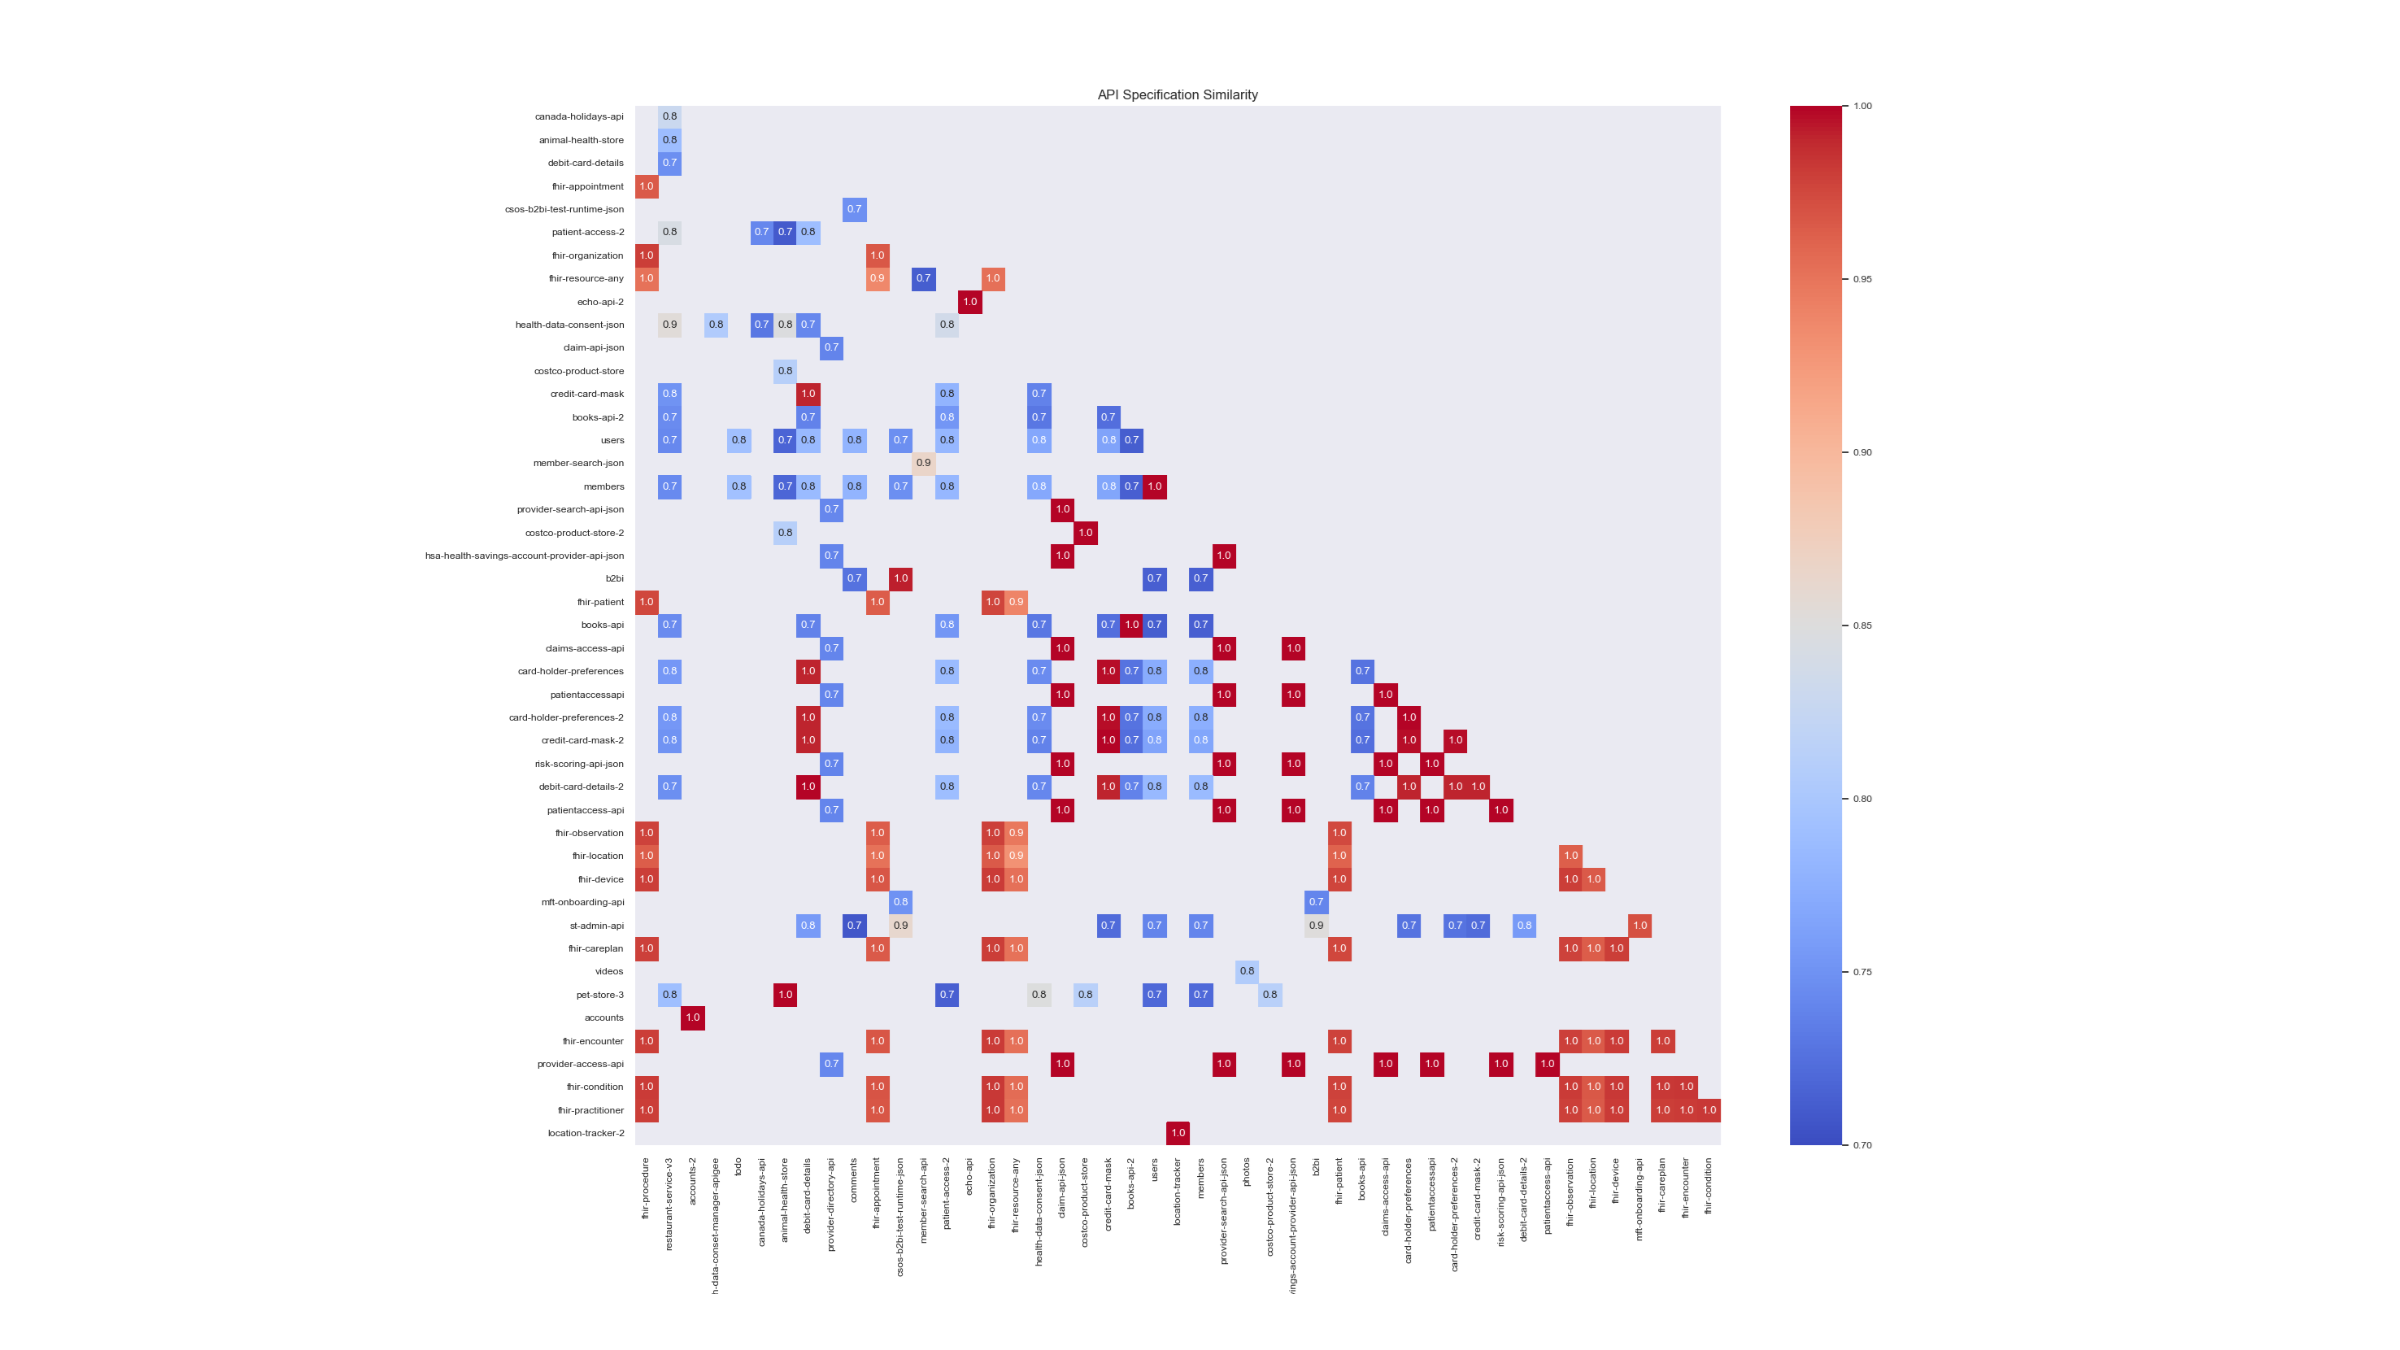 a heat map of duplicate APIs, with red being a 100% match and blue being 0, with a gradient in betwen.